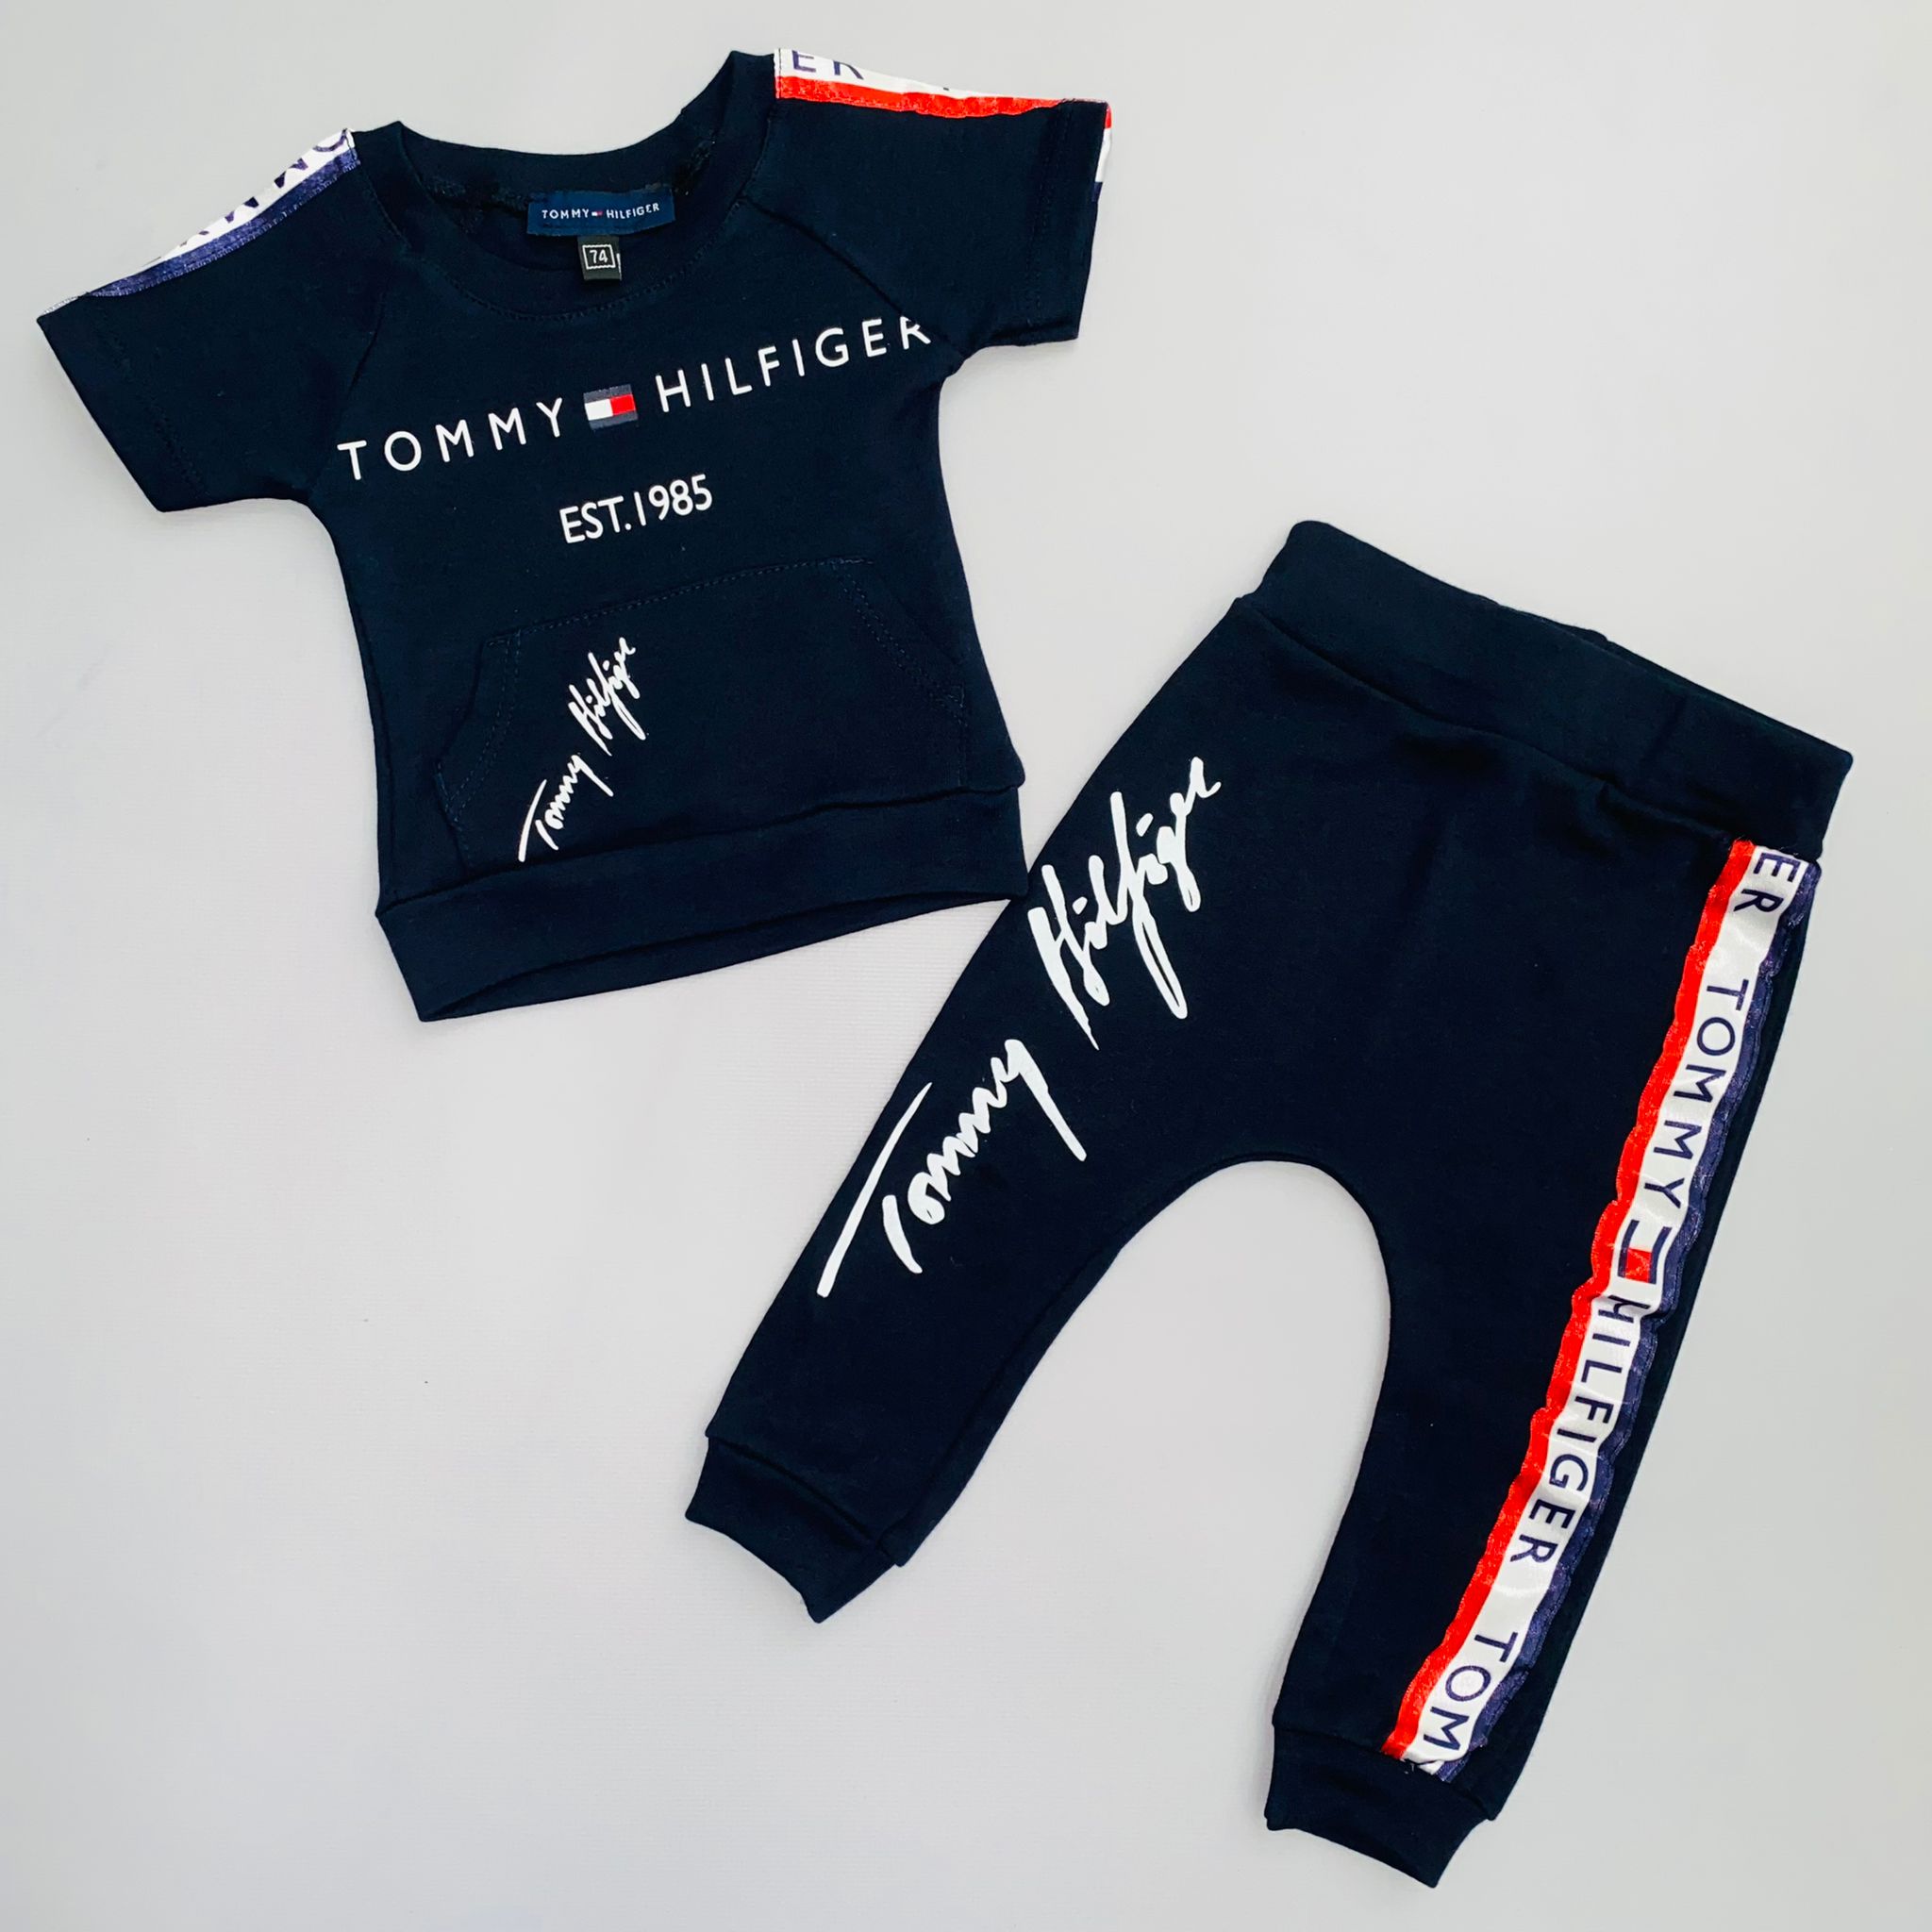 Tommy Hilfiger Children Clothing Sets For BoysJustice | CartRollers Marketplace Shopping Store In Lagos Nigeria